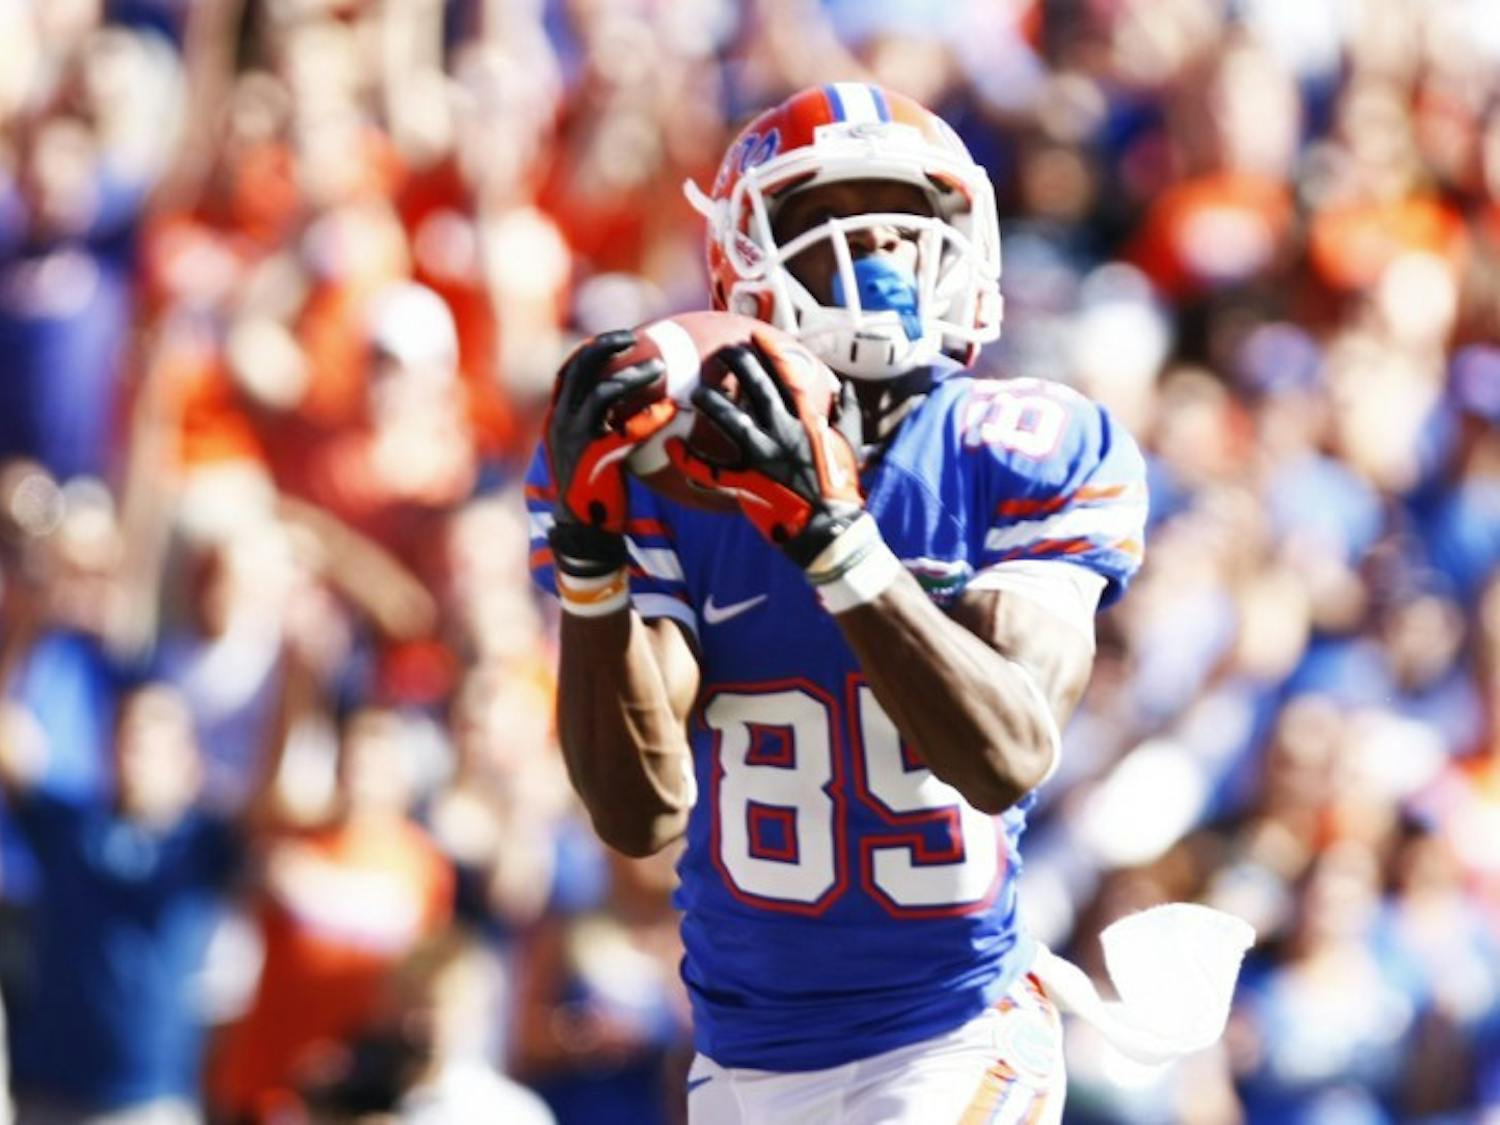 Wideout Frankie Hammond Jr. hauls in a 43-yard touchdown during UF’s 14-7 win against Missouri on Saturday. The play was called back due to a holding call on Jon Halapio.&nbsp;
